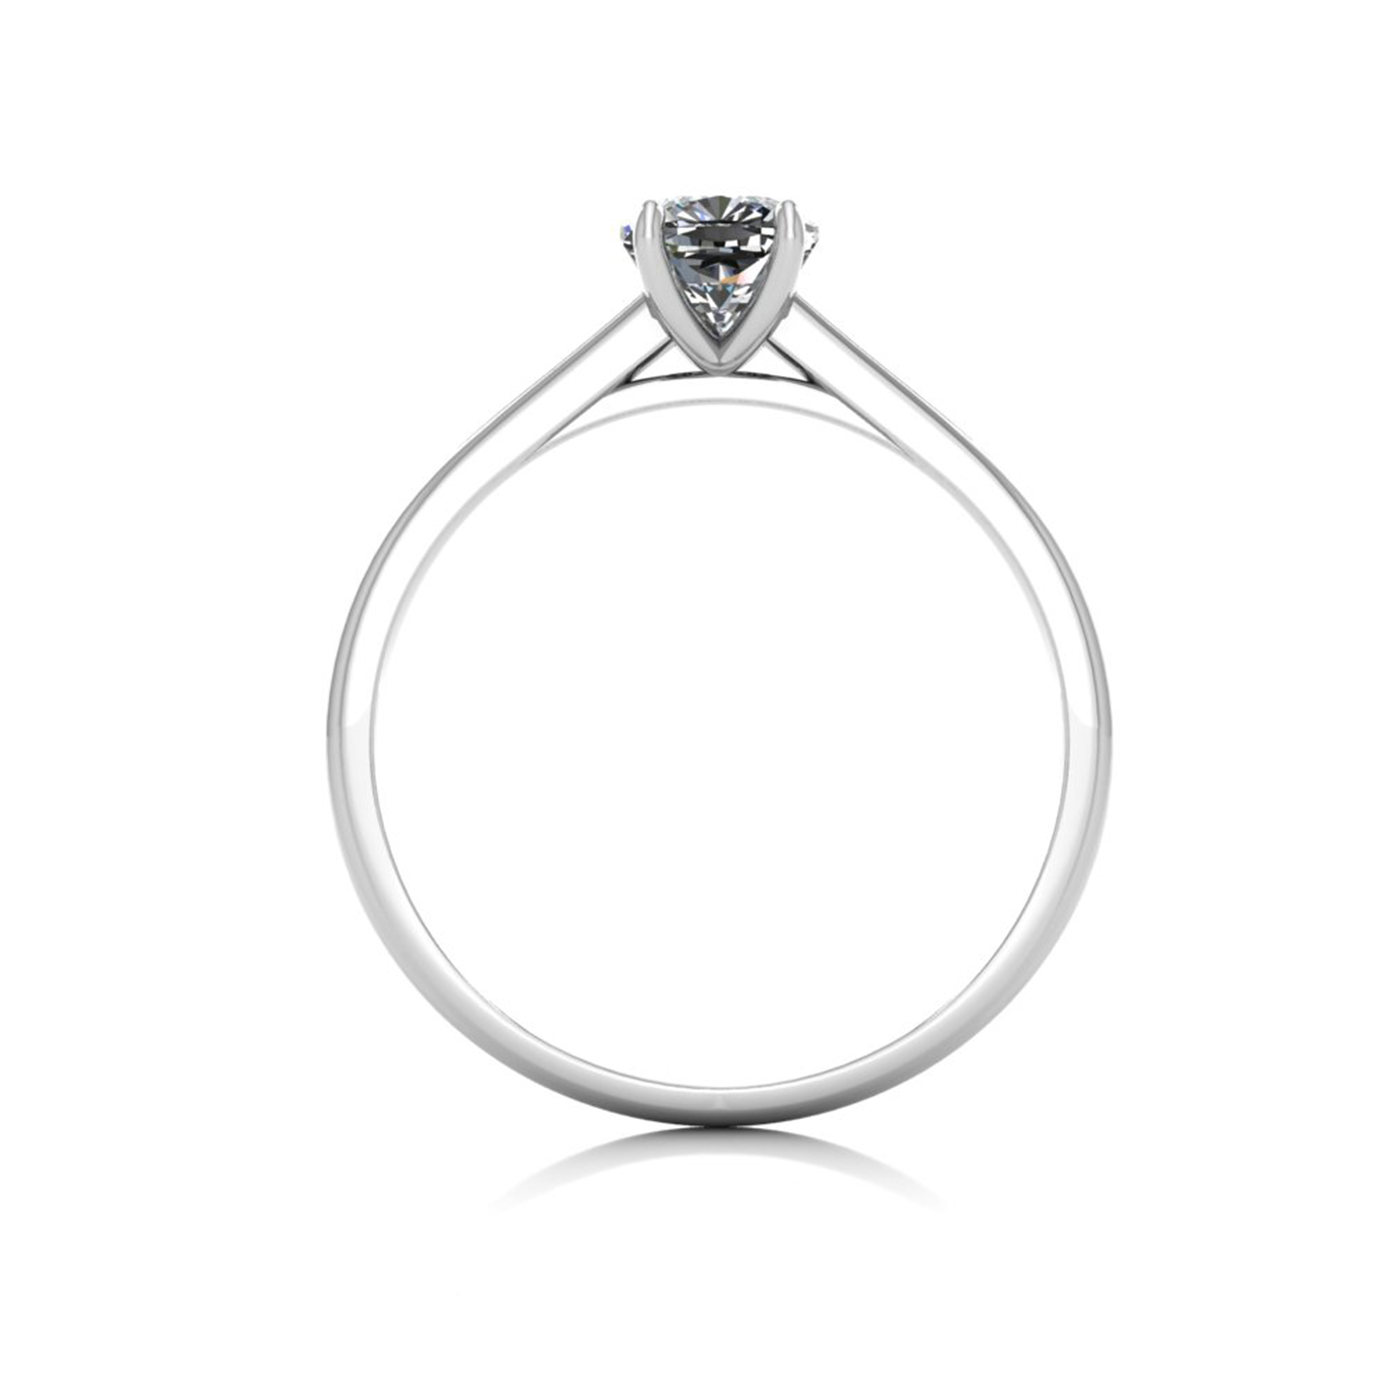 18k white gold 0,80 ct 4 prongs solitaire cushion cut diamond engagement ring with whisper thin band